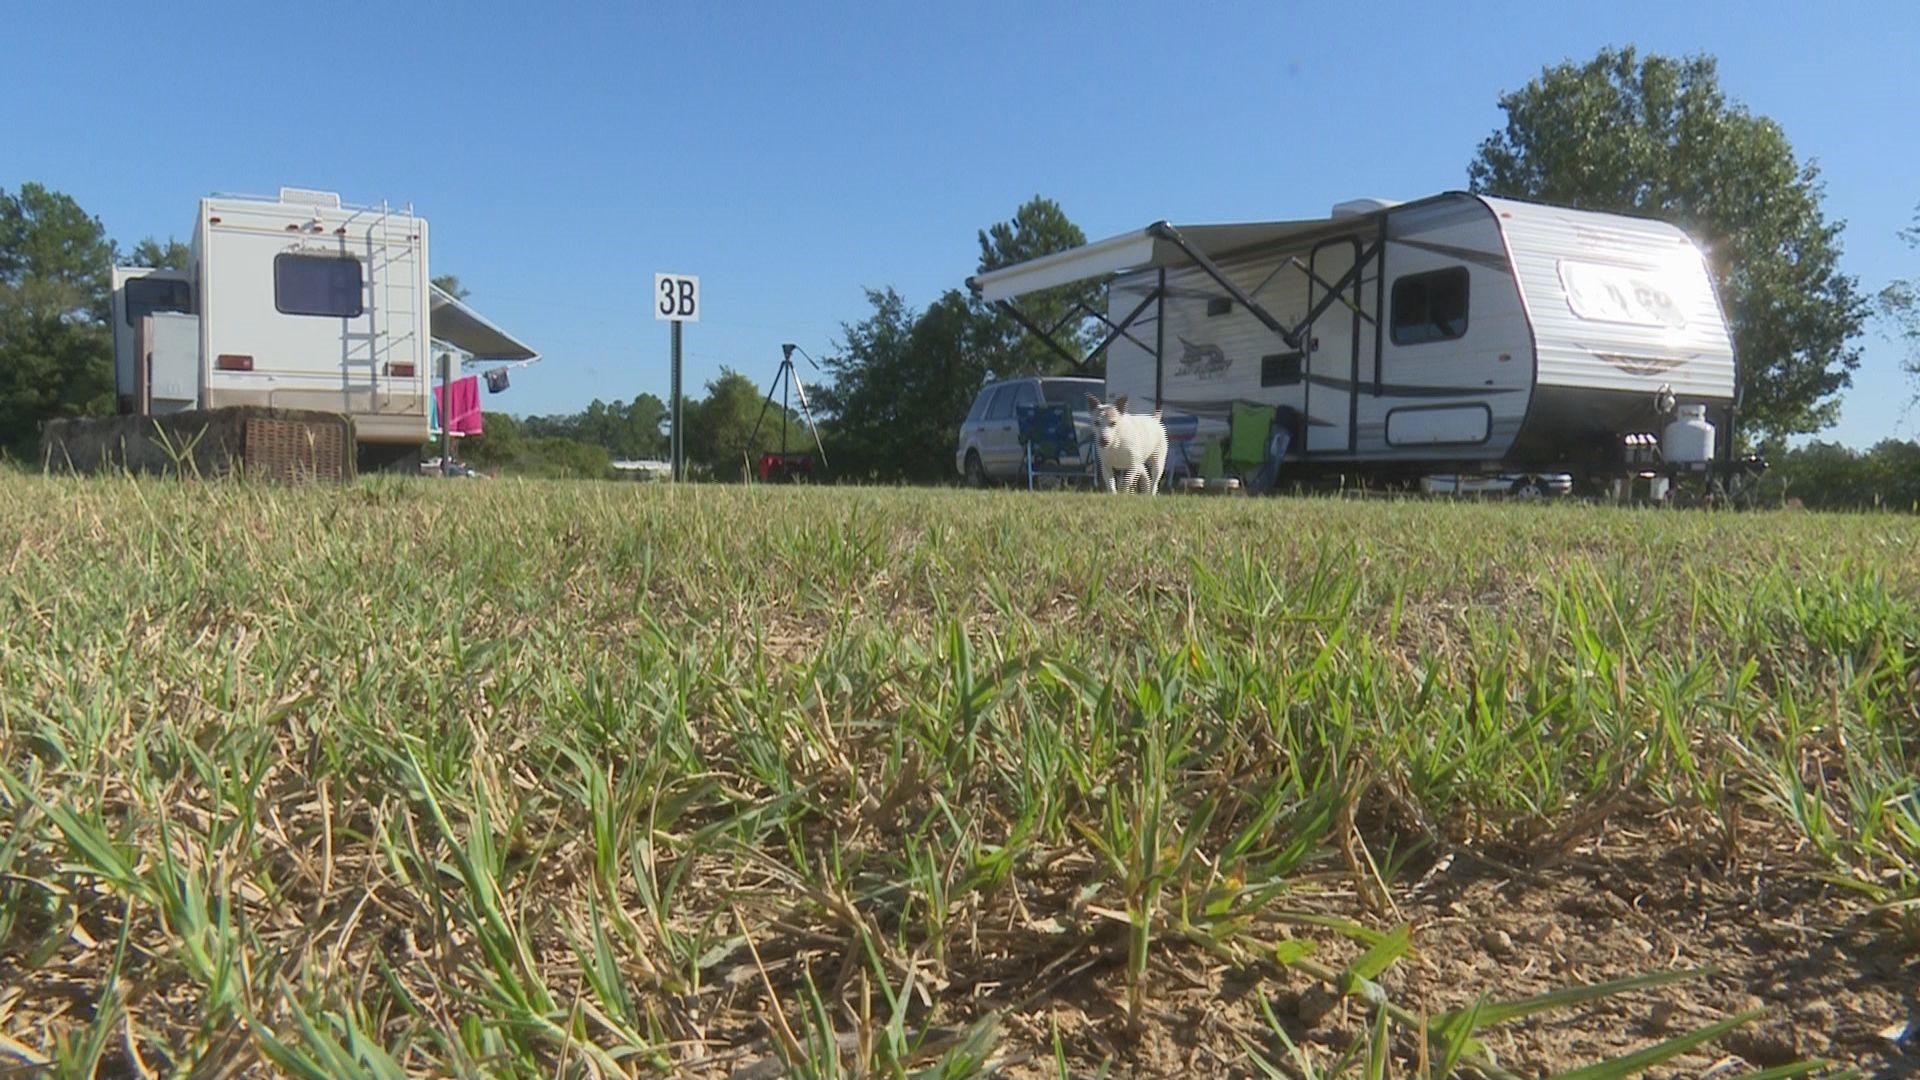 The Dublin-Laurens recreation department is allowing animals to stay for free for hurricane Dorian evacuations.